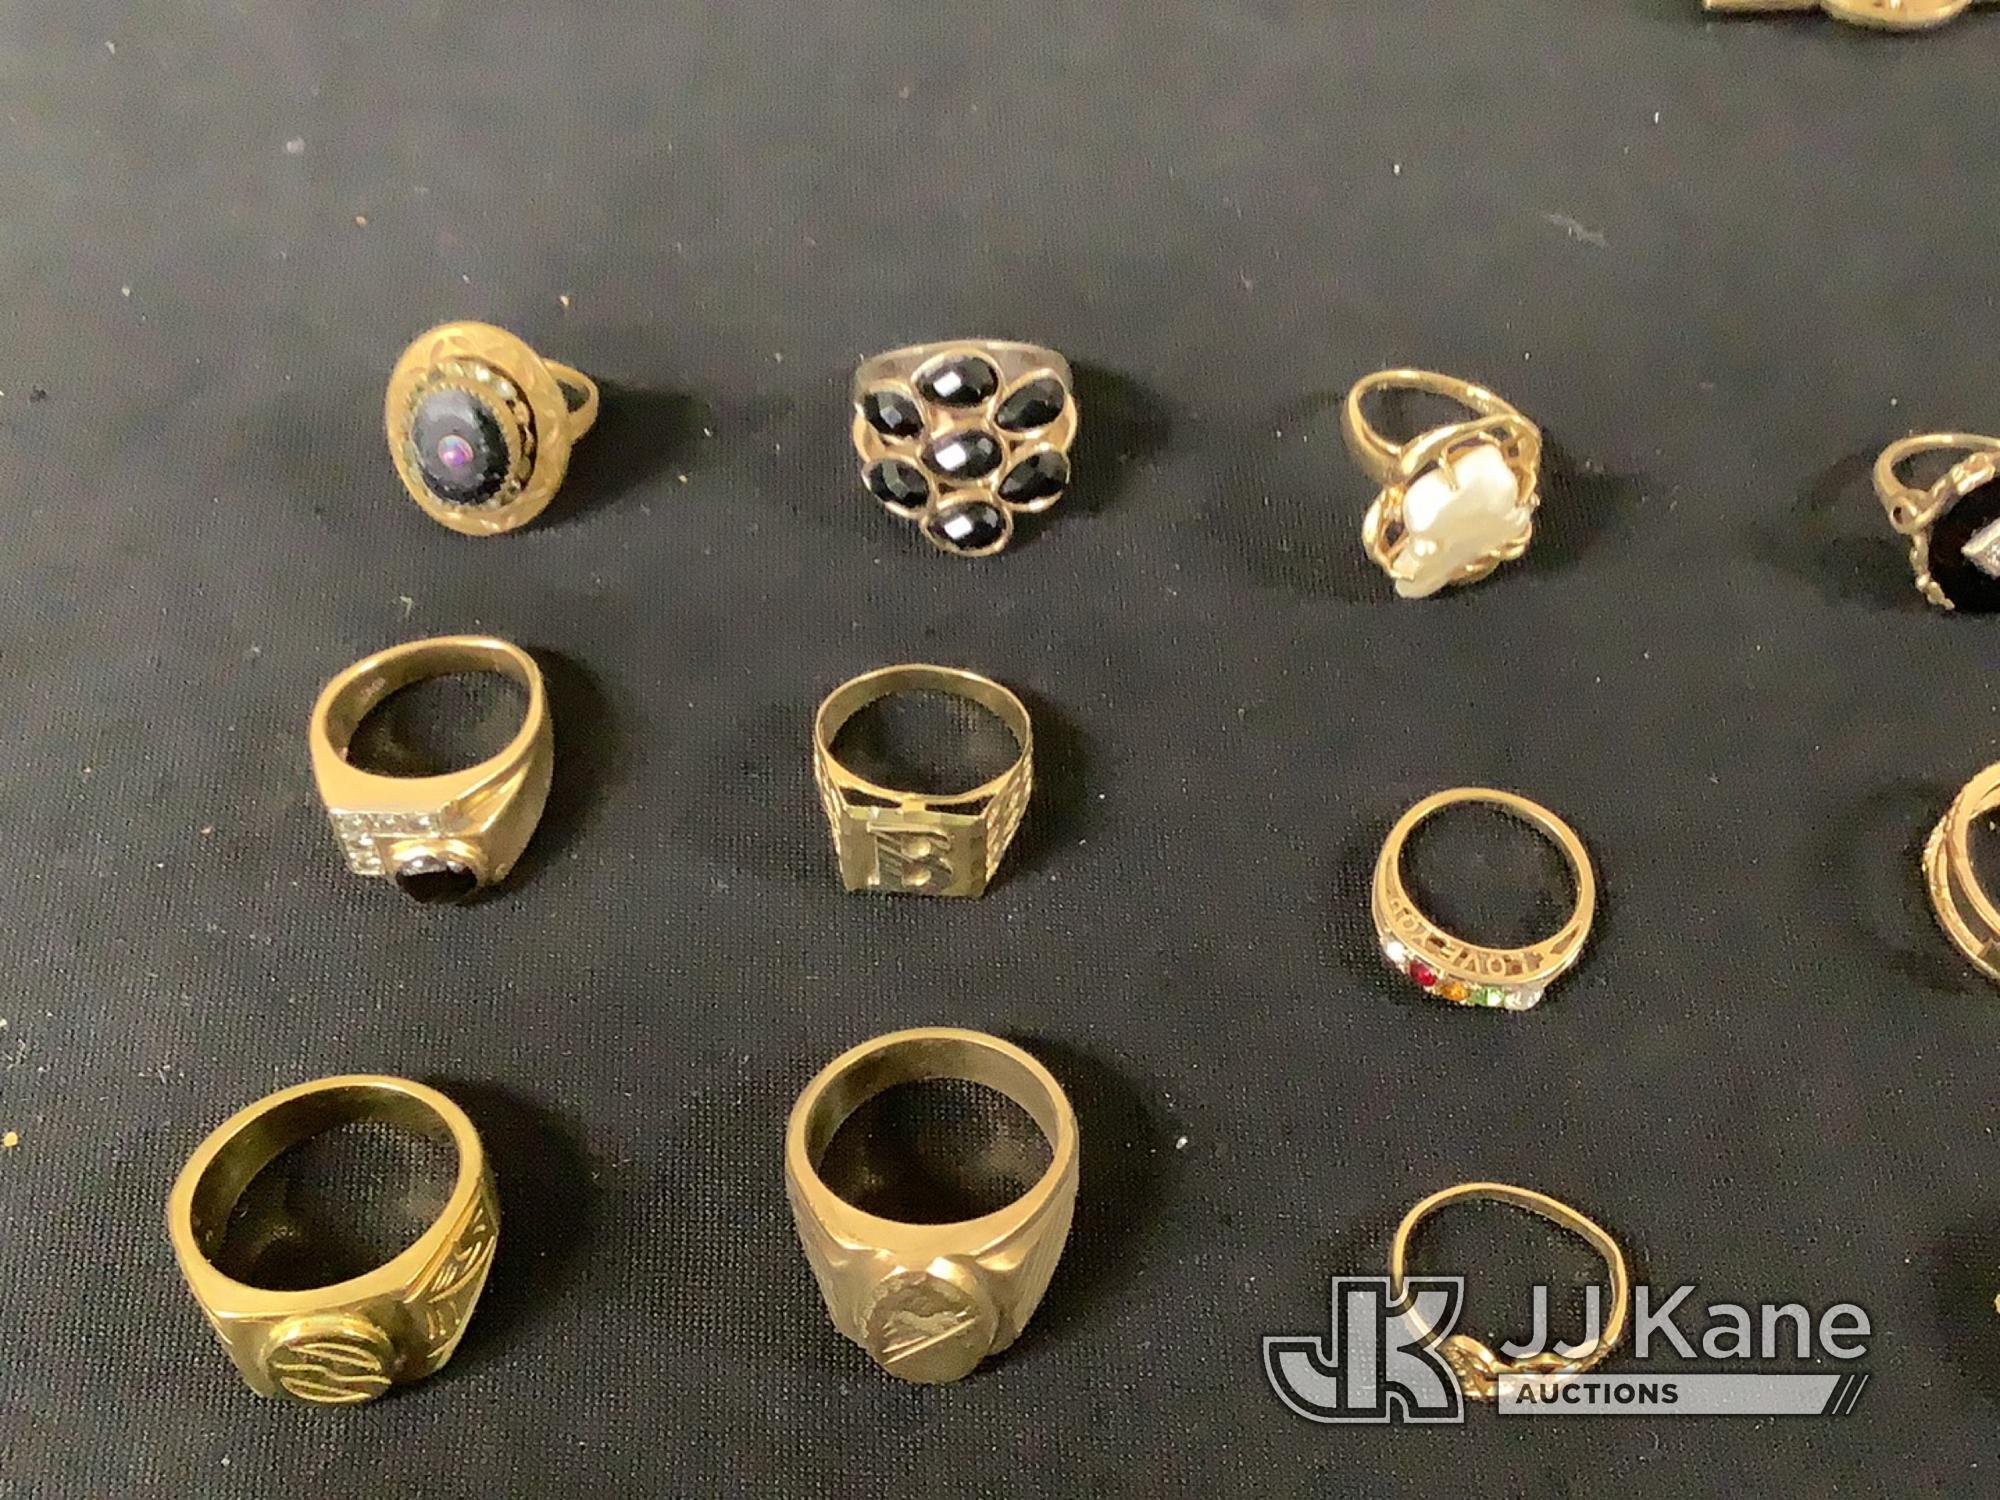 (Jurupa Valley, CA) Rings | possible costume jewelry | authenticity unknown (Used) NOTE: This unit i